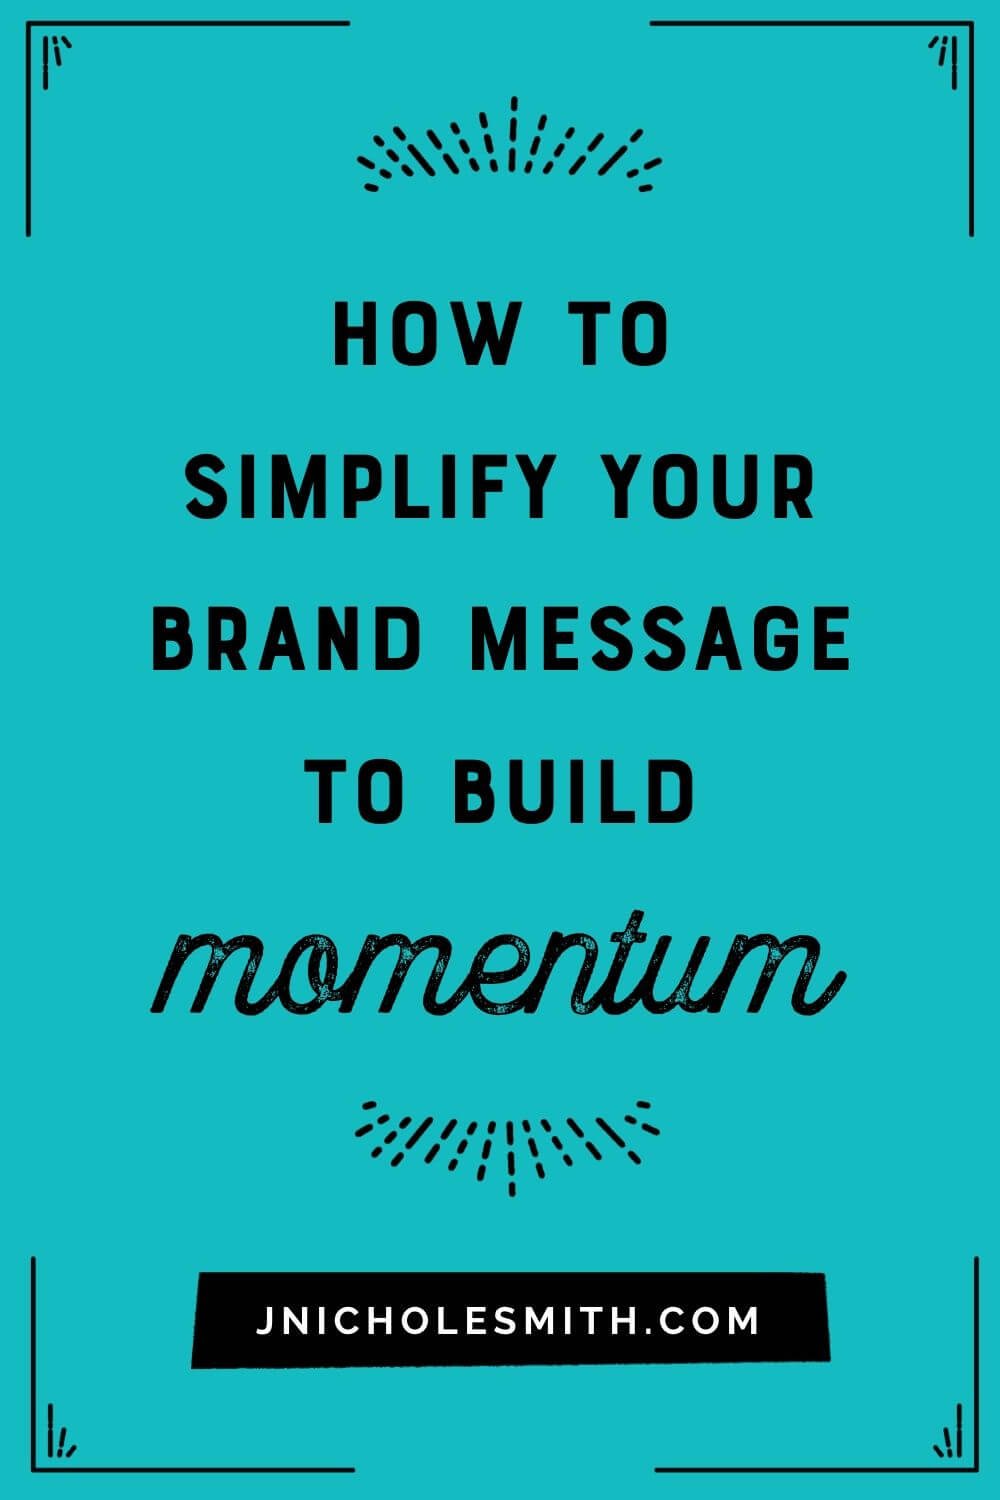 Building Message Momentum pin image